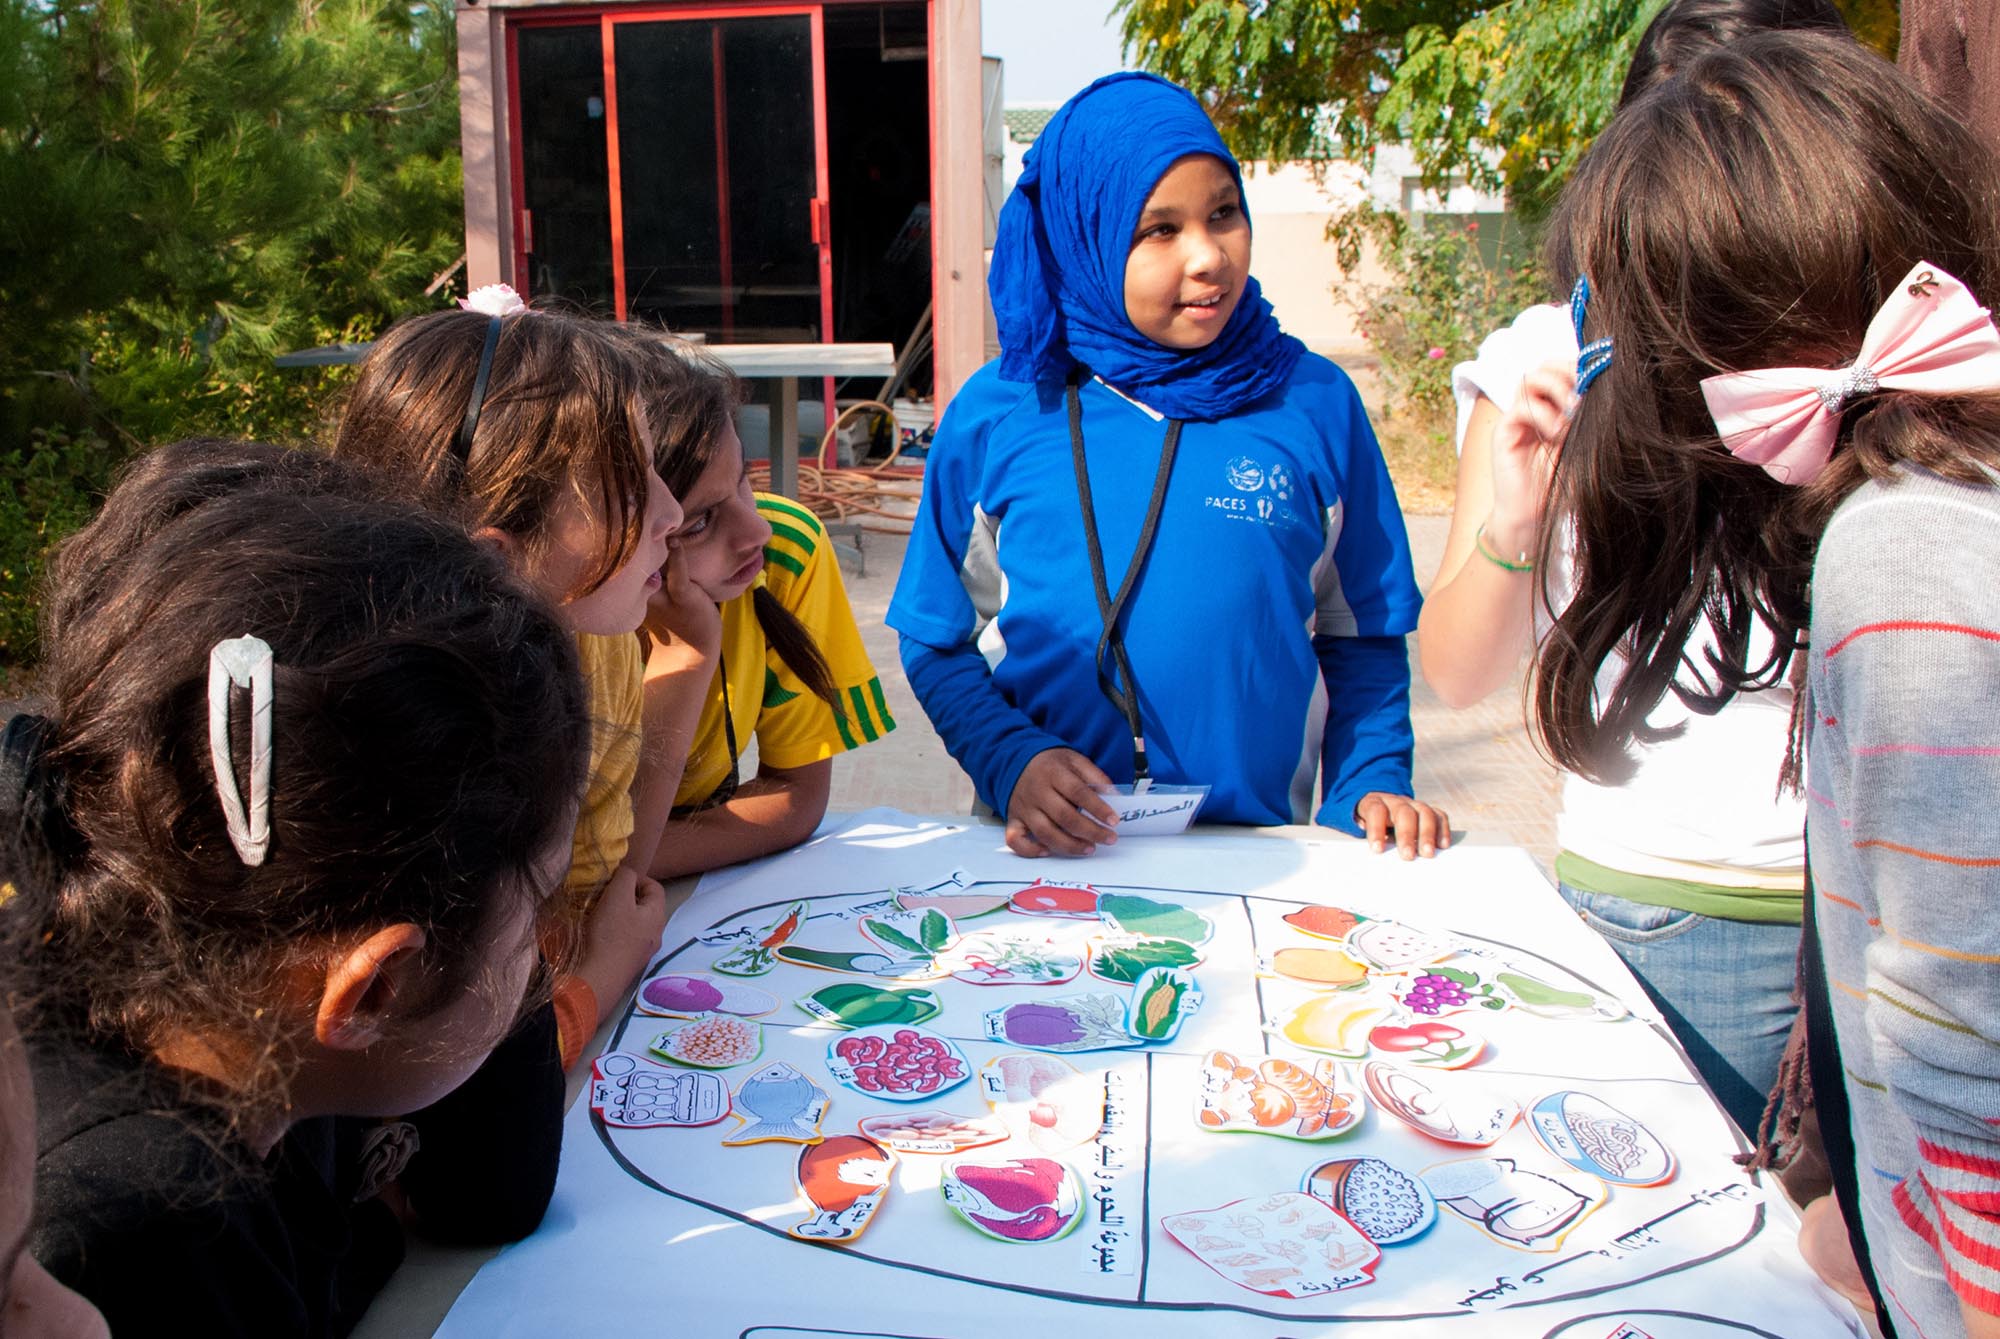 Board games and group activities are part of Anera’s Sports for Peace and Development program.